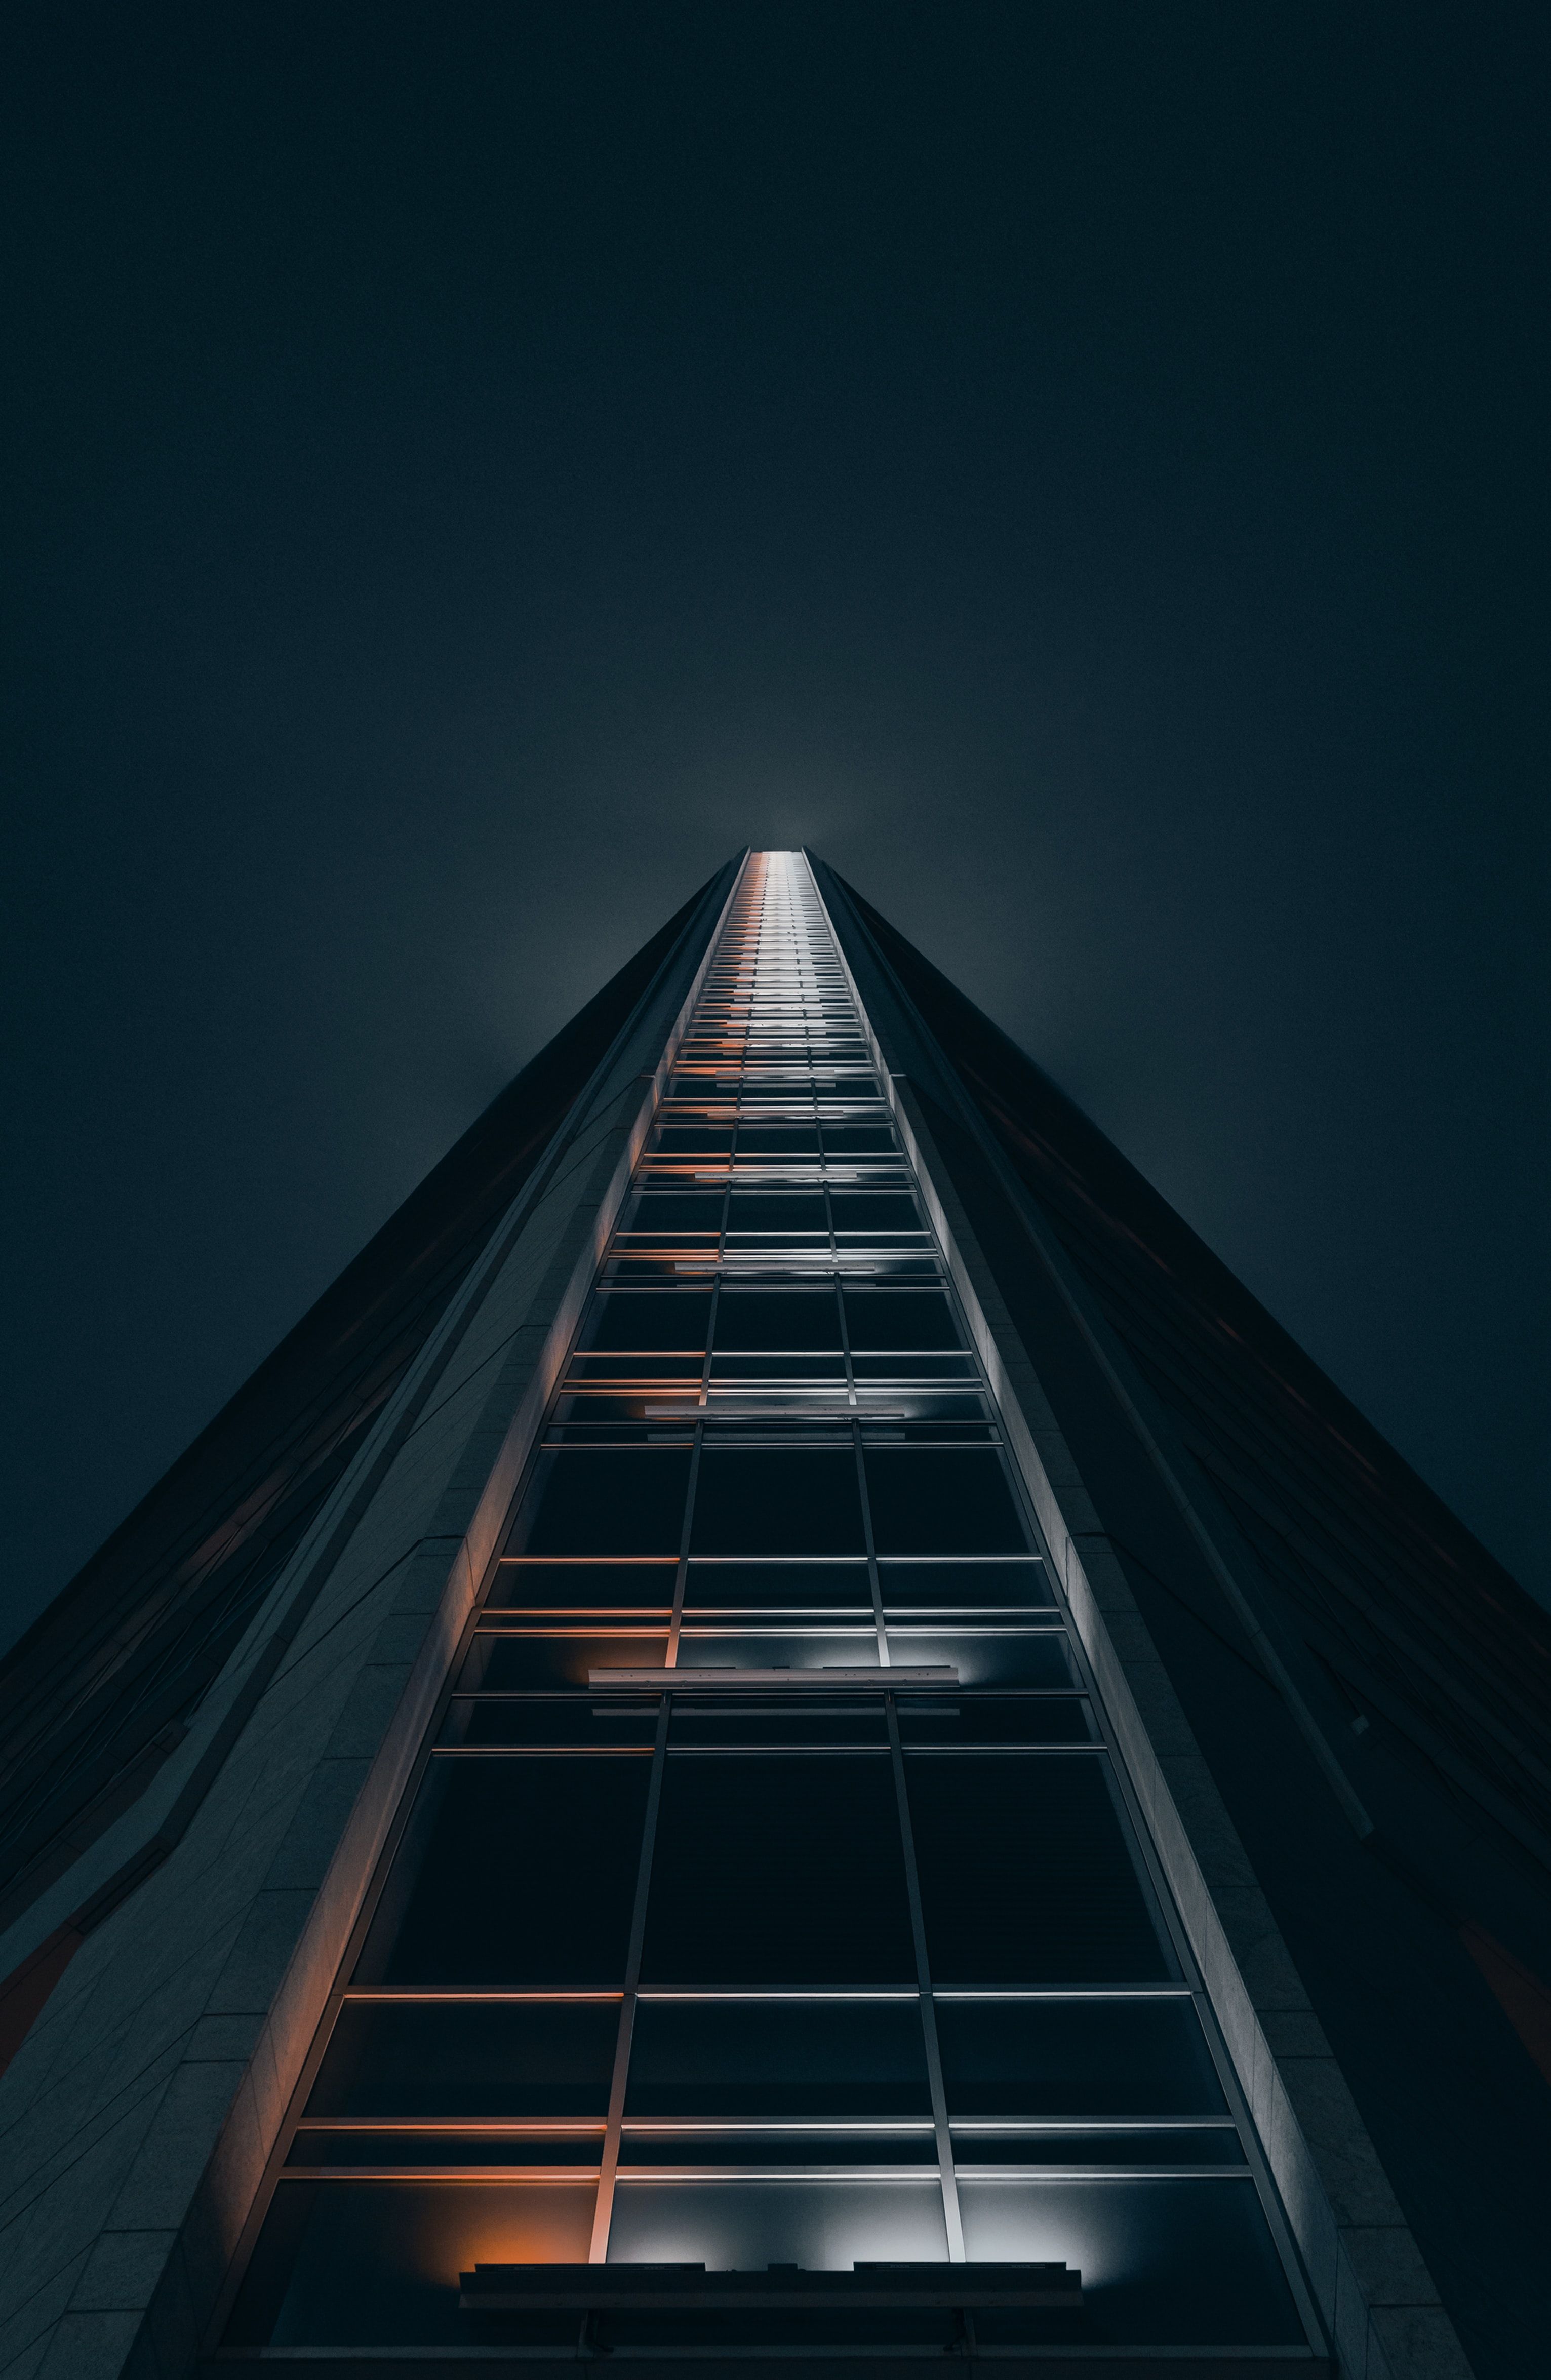 High rise building Wallpaper 4K, Low Angle Photography, Look up, Dark background, Architecture